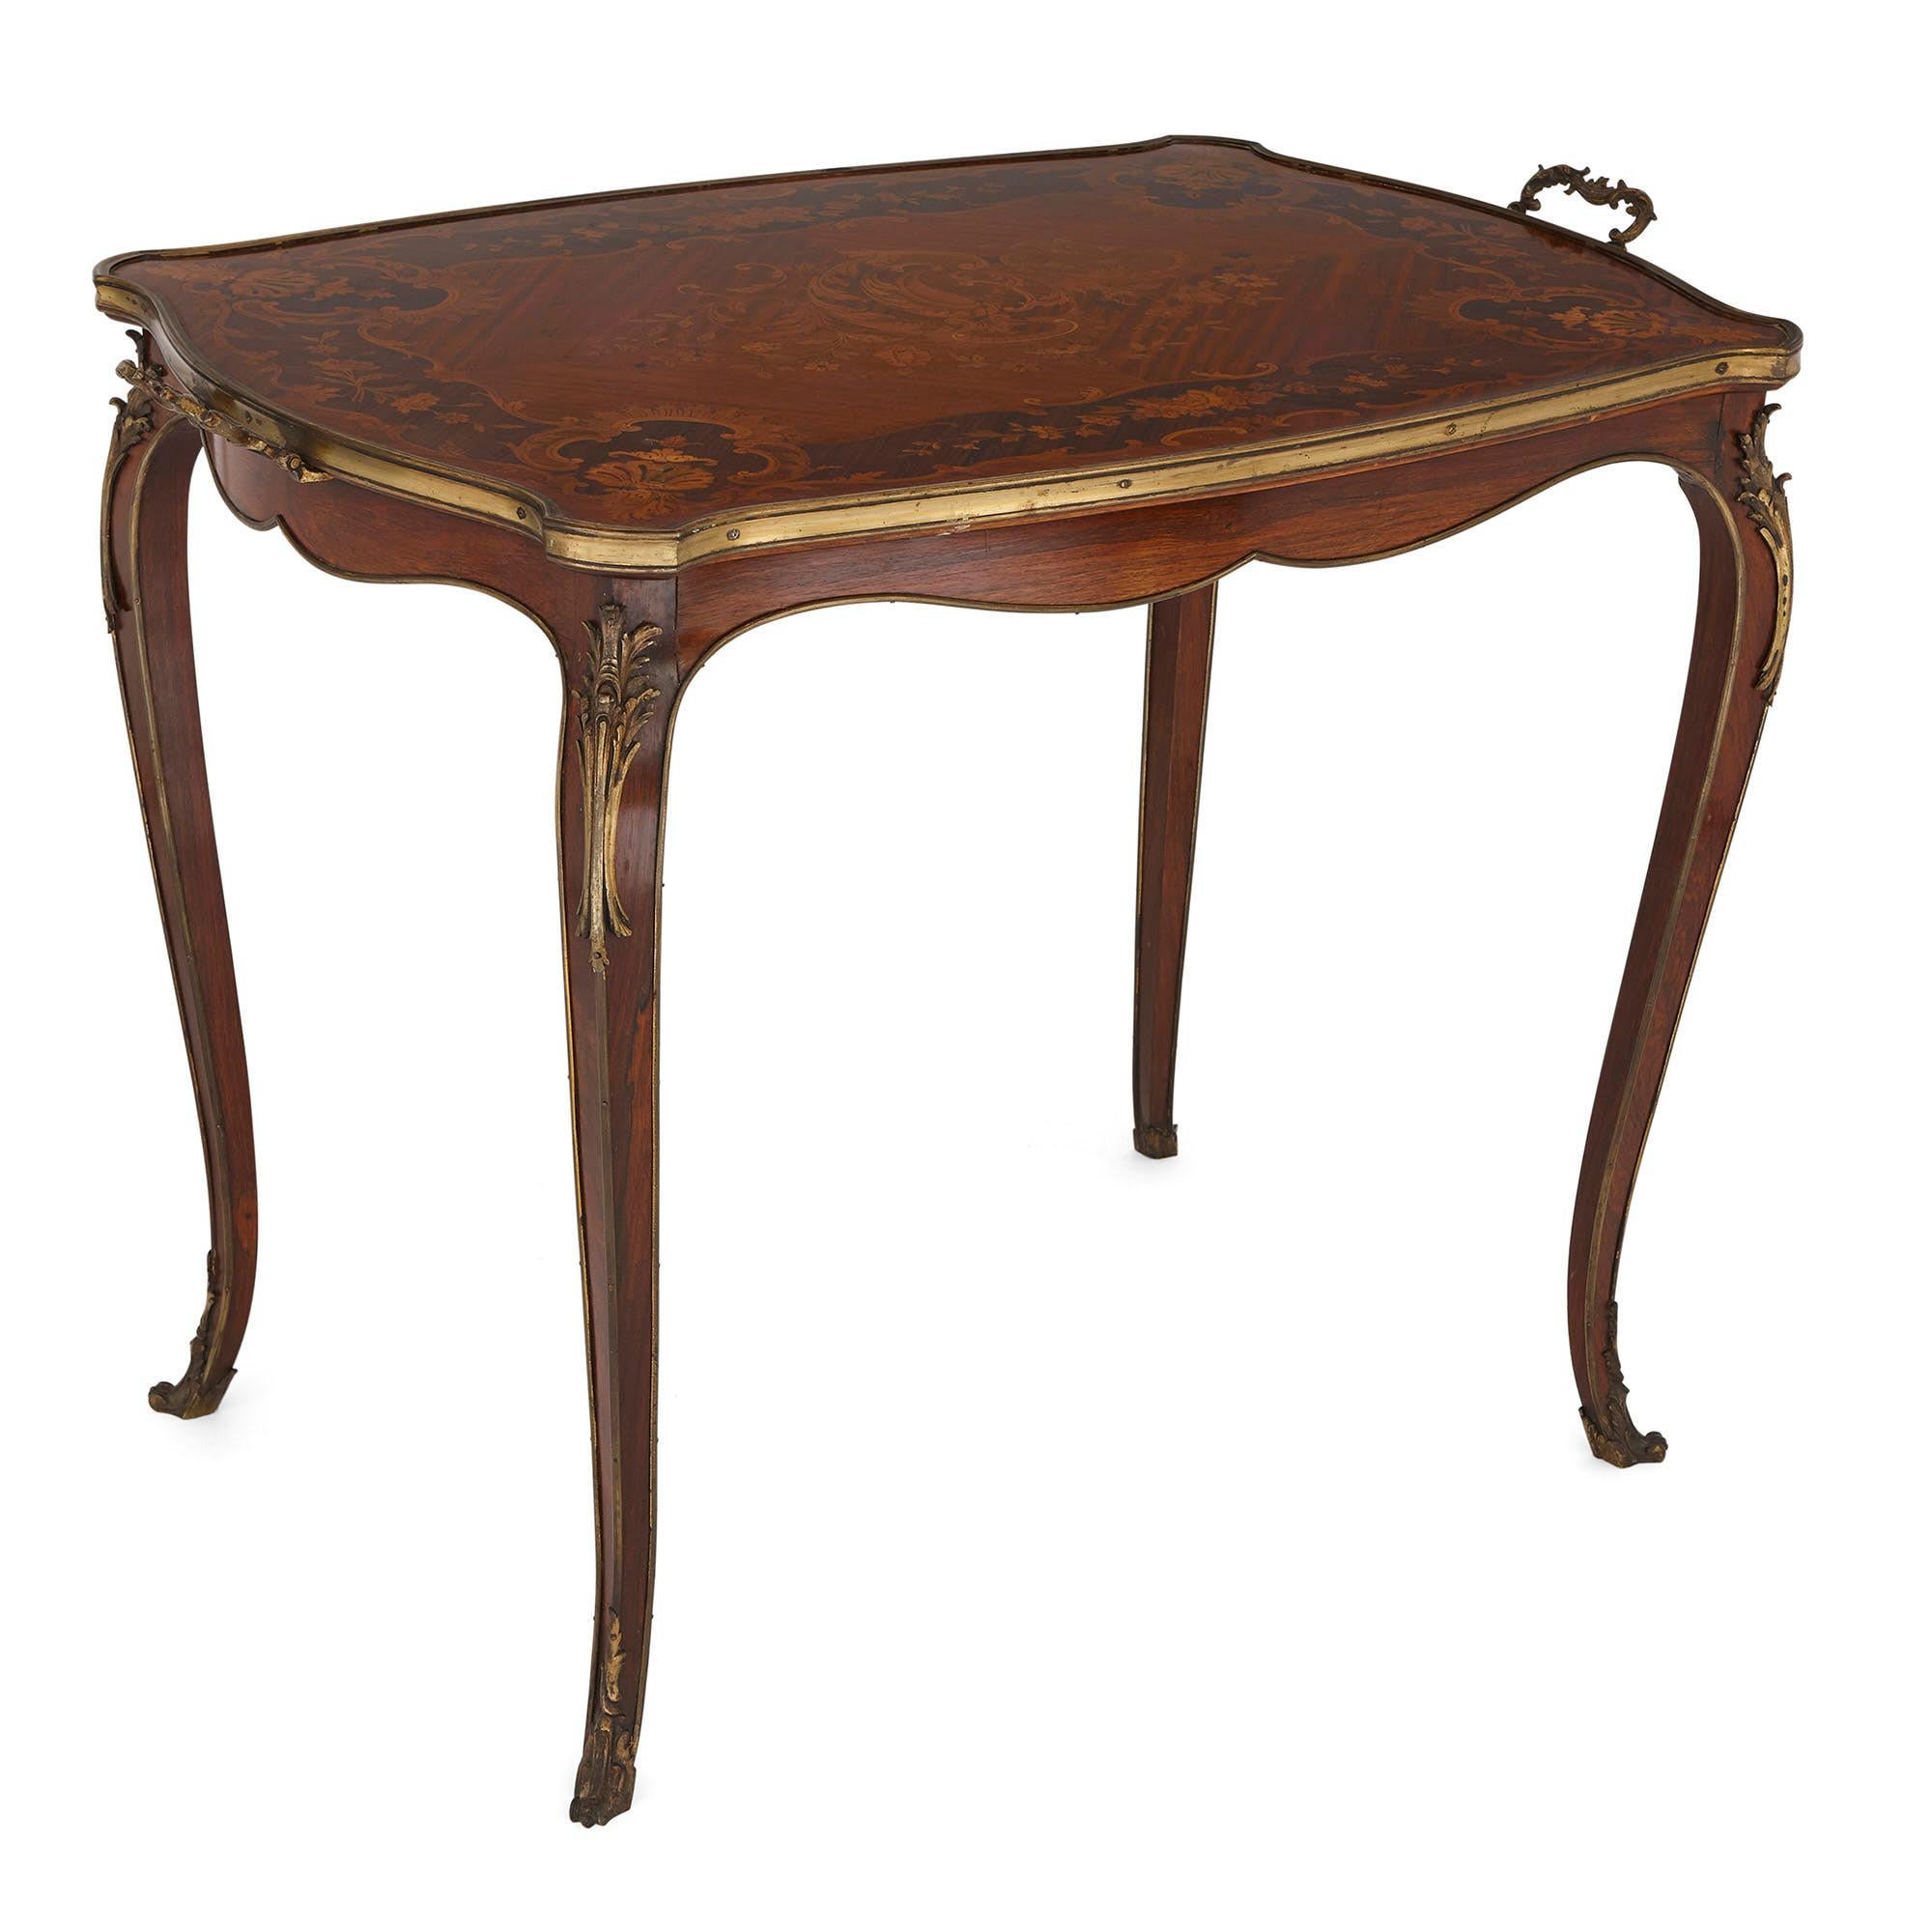 This rosewood tea table is a beautiful piece of early 20th century French furniture. It is designed in the 18th century Rococo, or Louis XV, style.

The table has a shaped rectangular top, which is exquisitely decorated with a marquetry design.